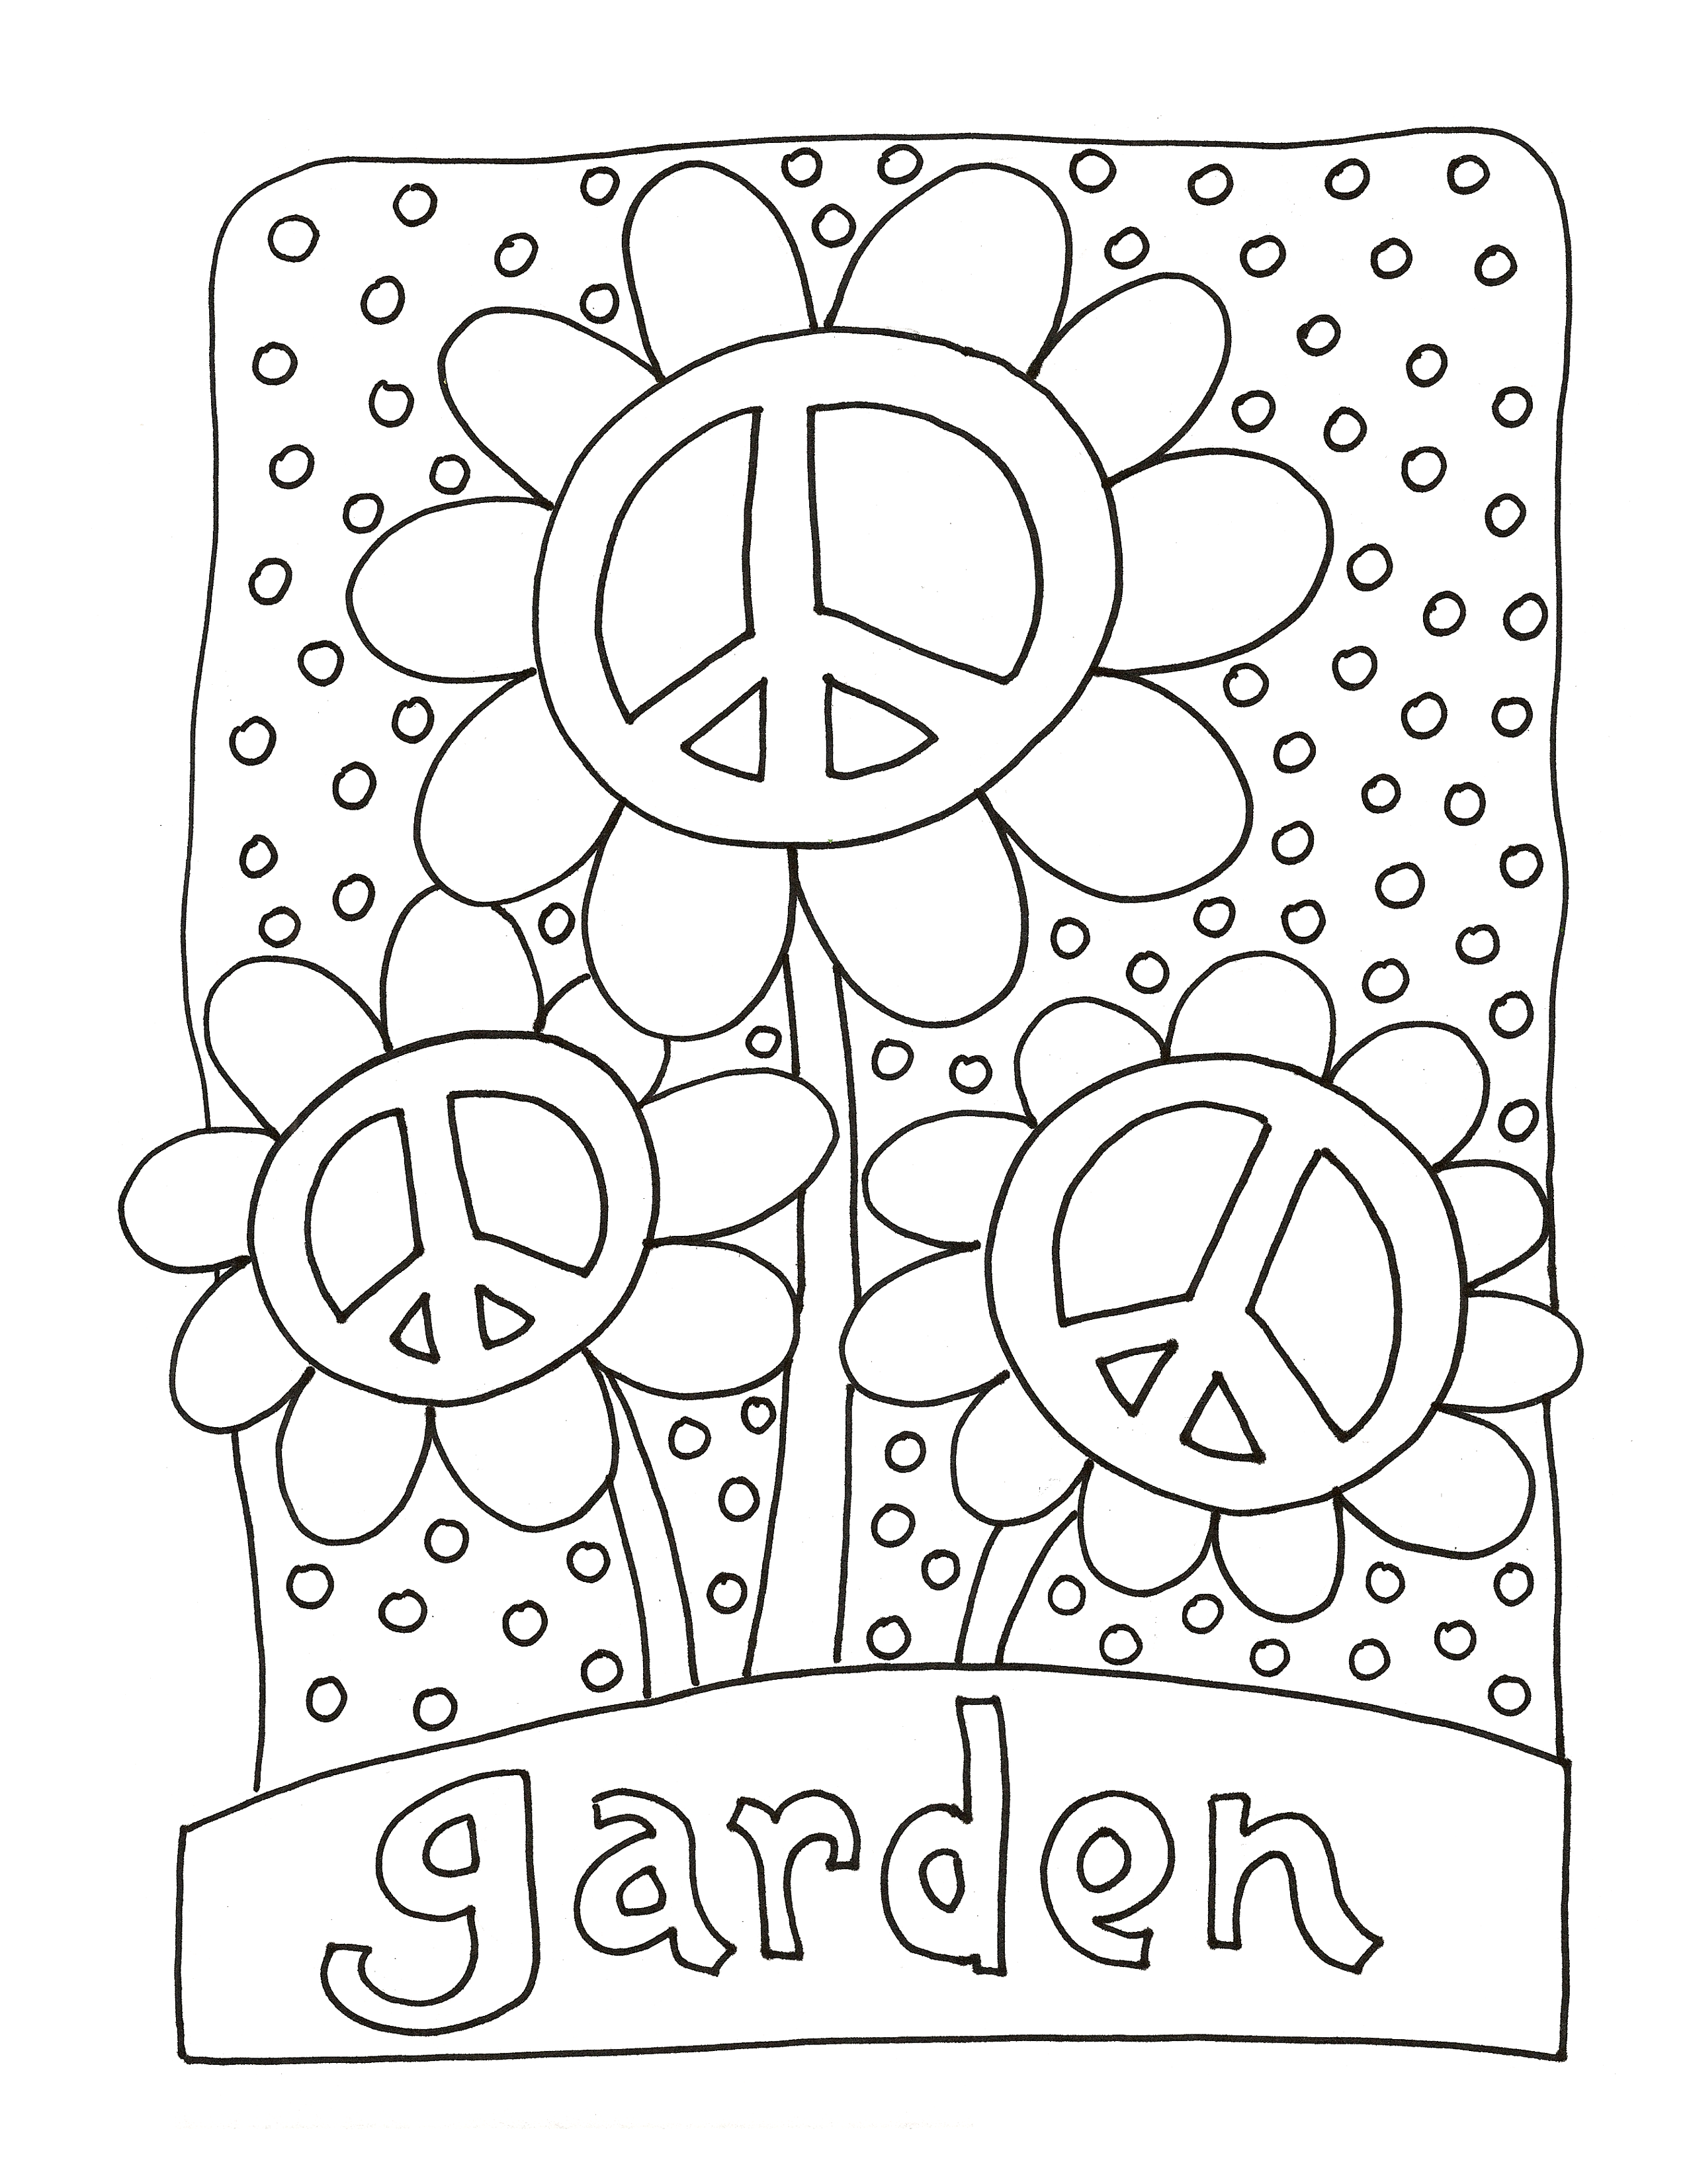 Coloring Art For Kids Coloring Pages